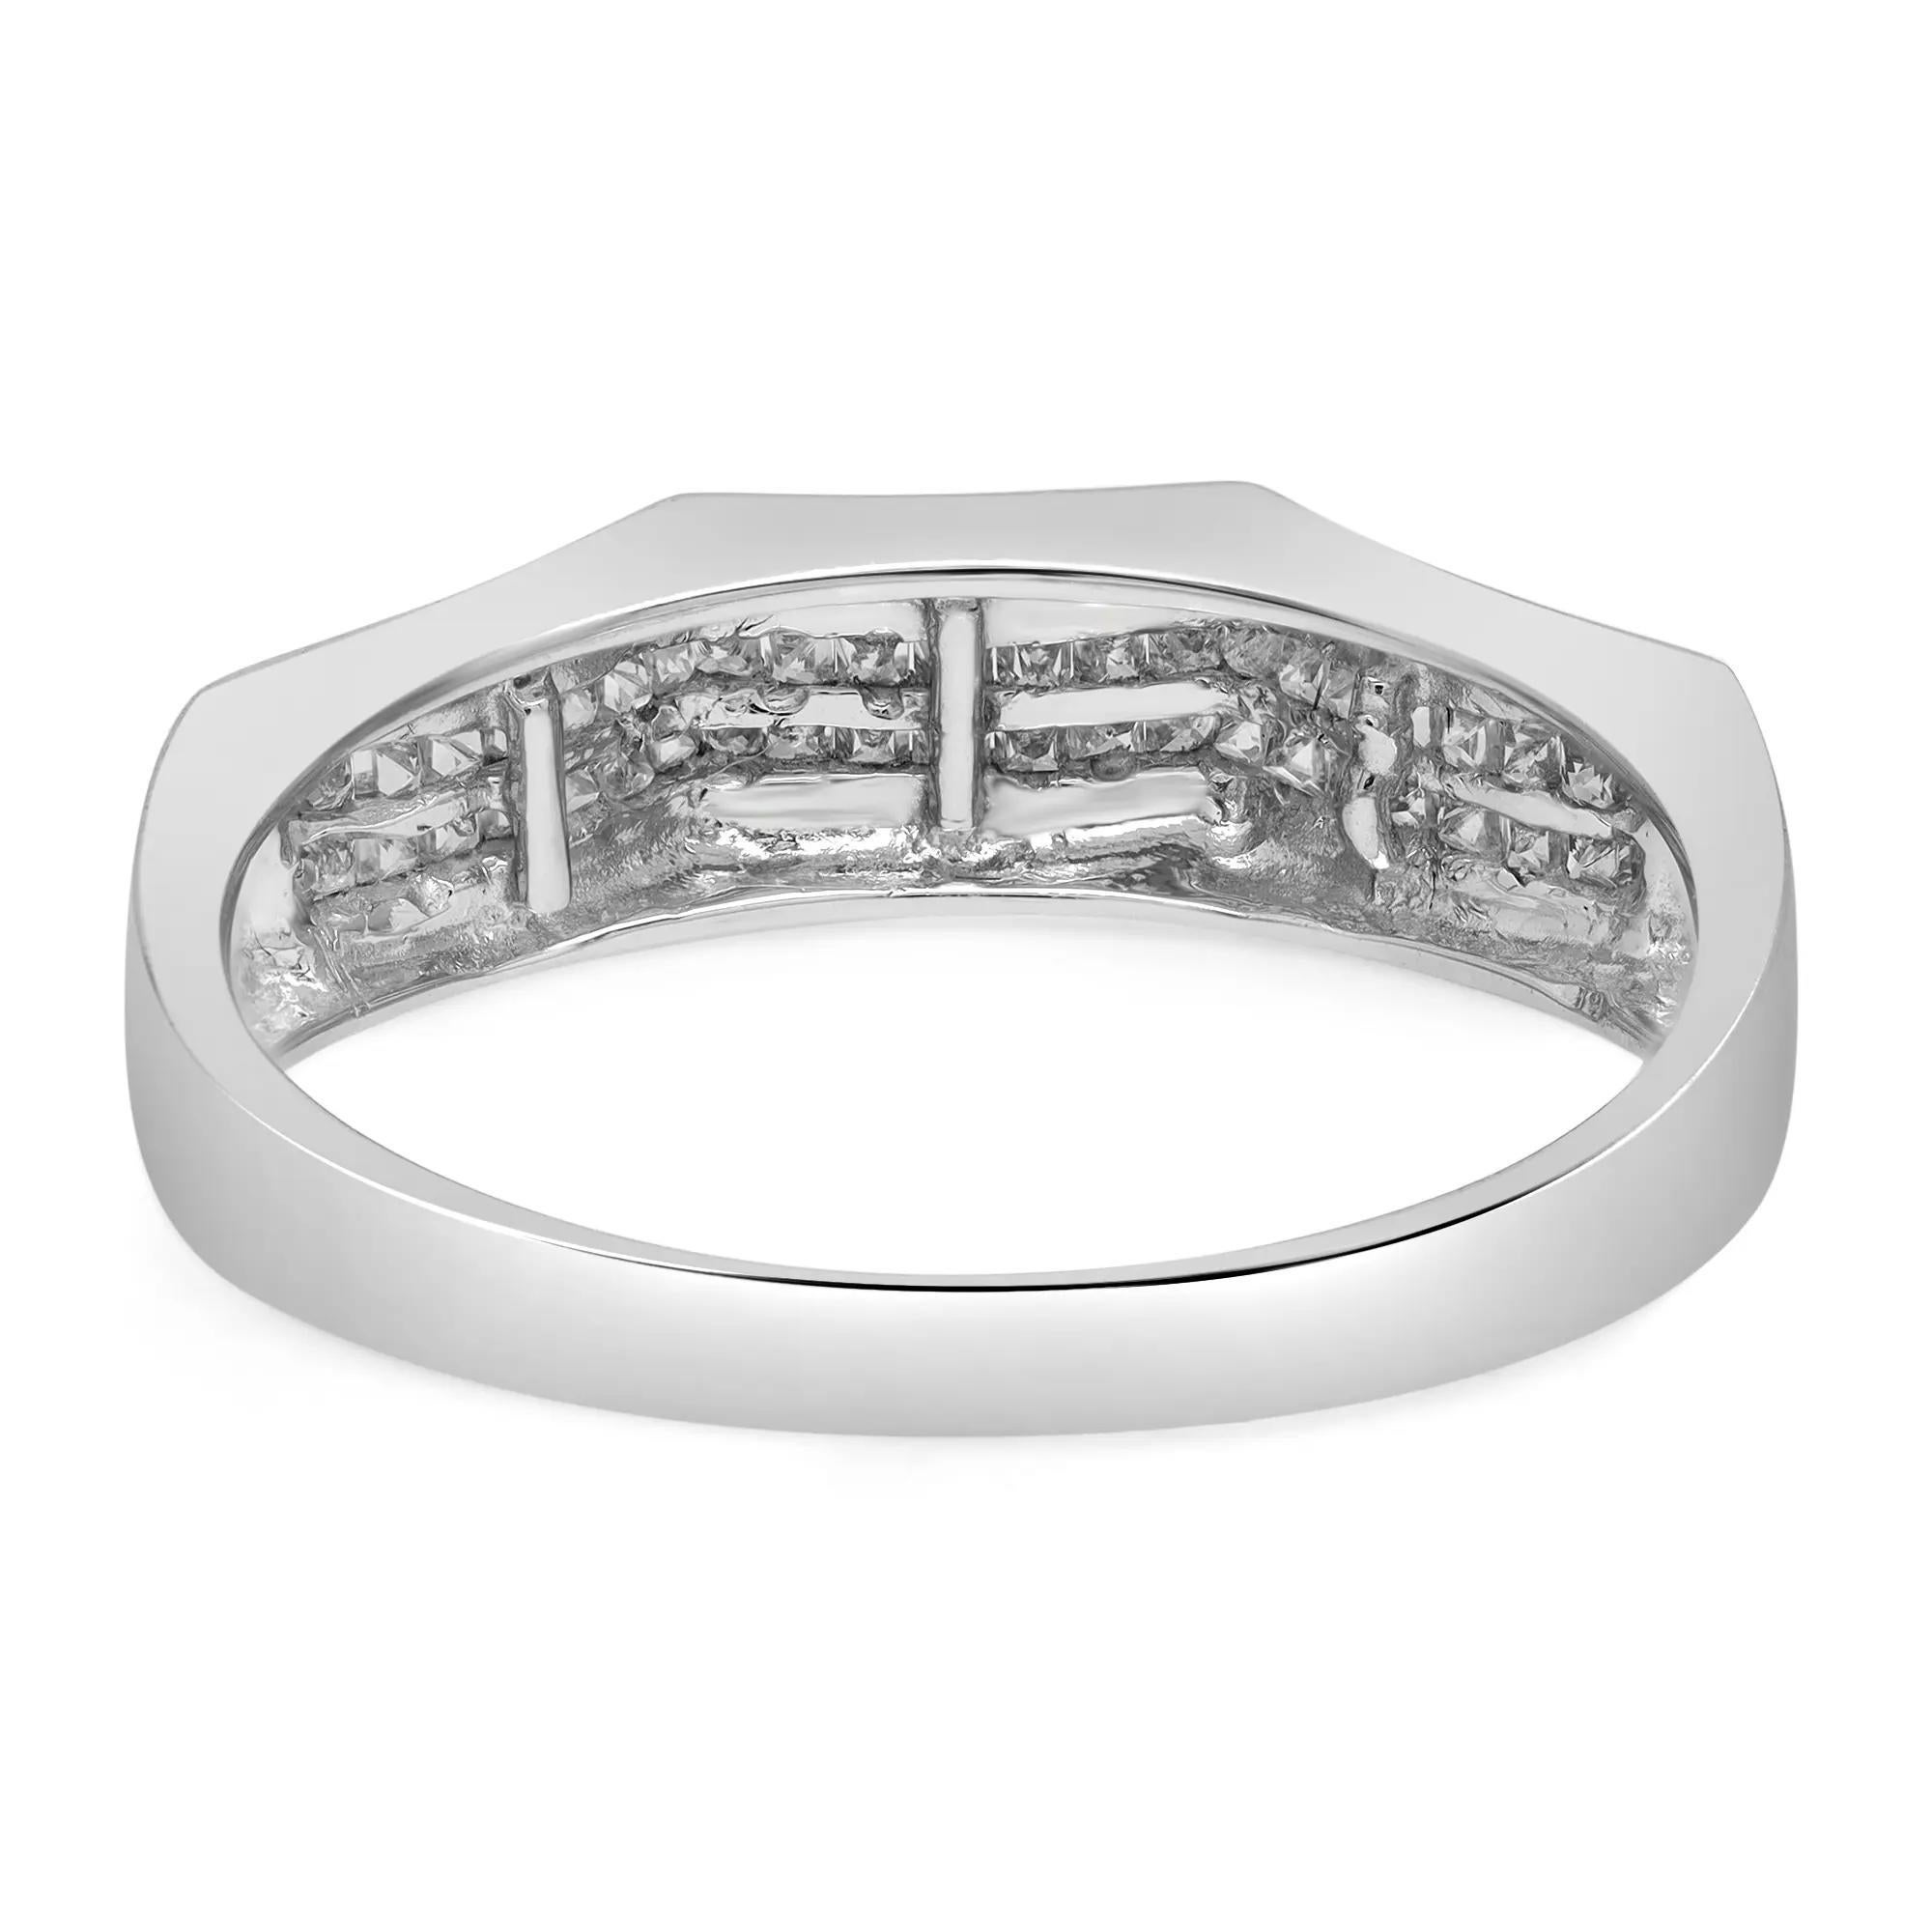 0.92Cttw Channel Set Princess Cut Diamond Mens Wedding Band Ring 14K White Gold In New Condition For Sale In New York, NY